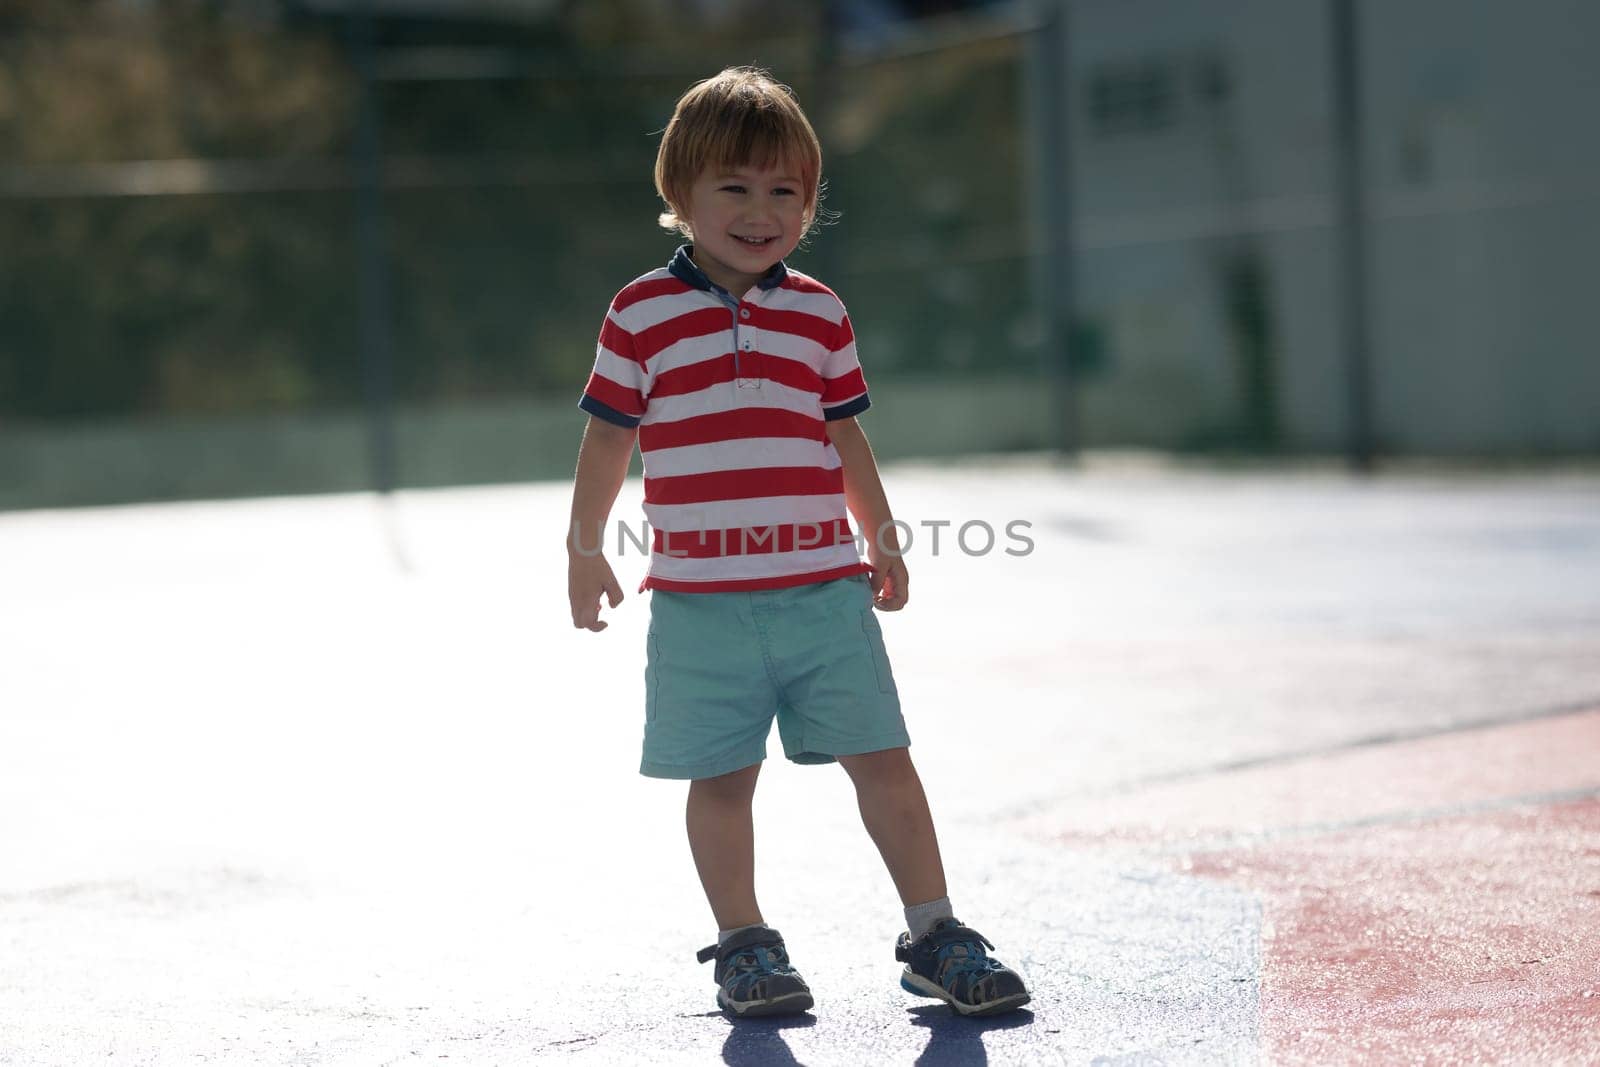 Little blonde smiling boy standing on the outdoors sports playground. Mid shot